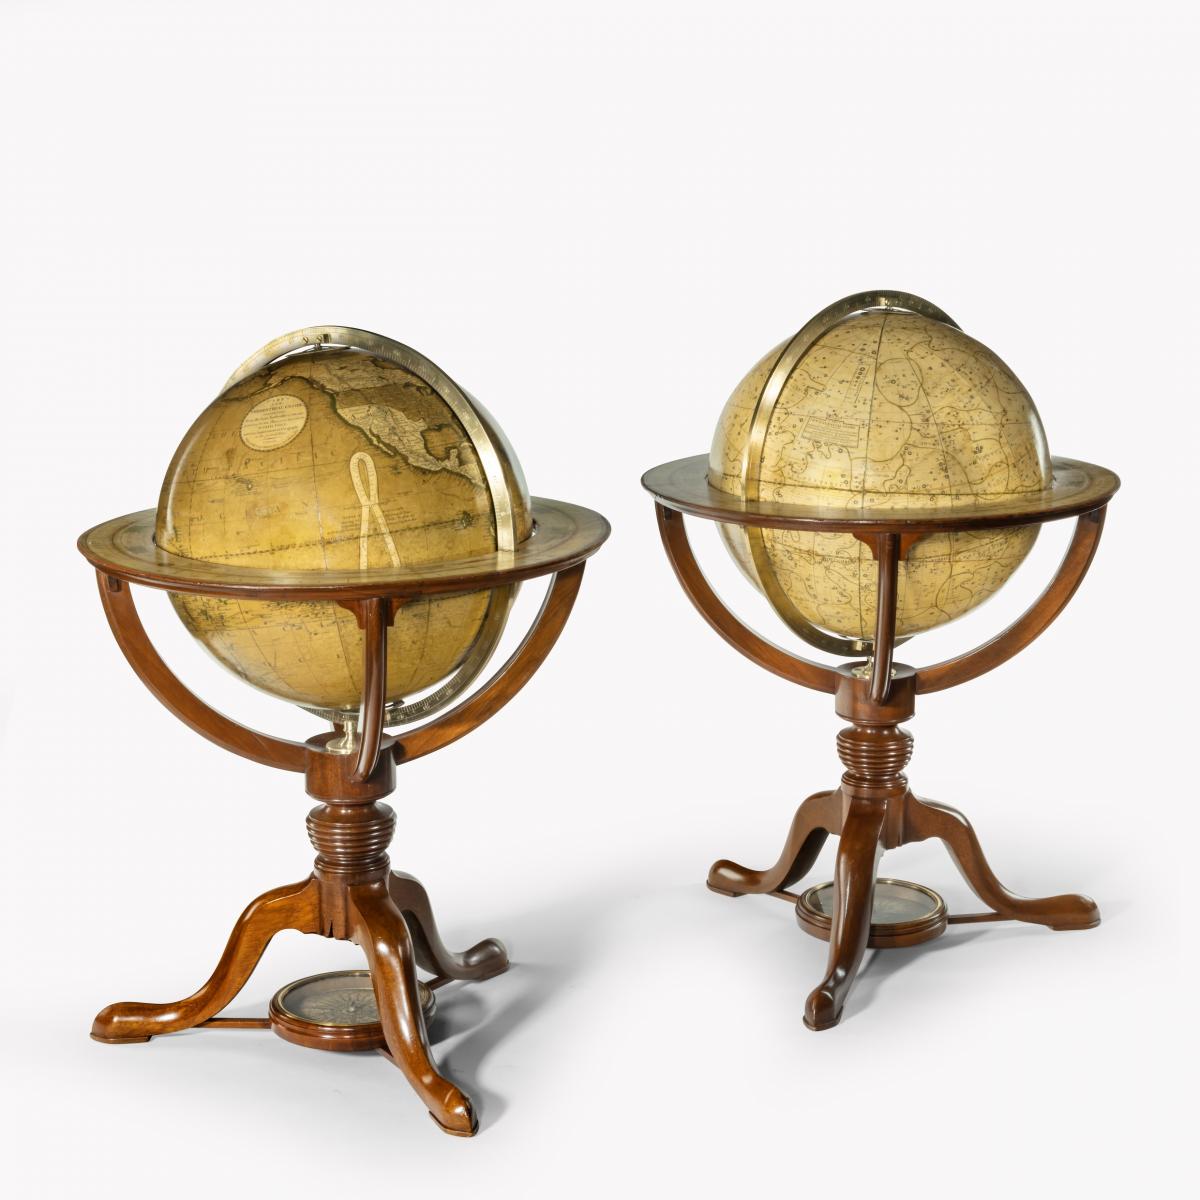 A pair of 12 inch table globes by G & J Cary, dated 1800 and 1821